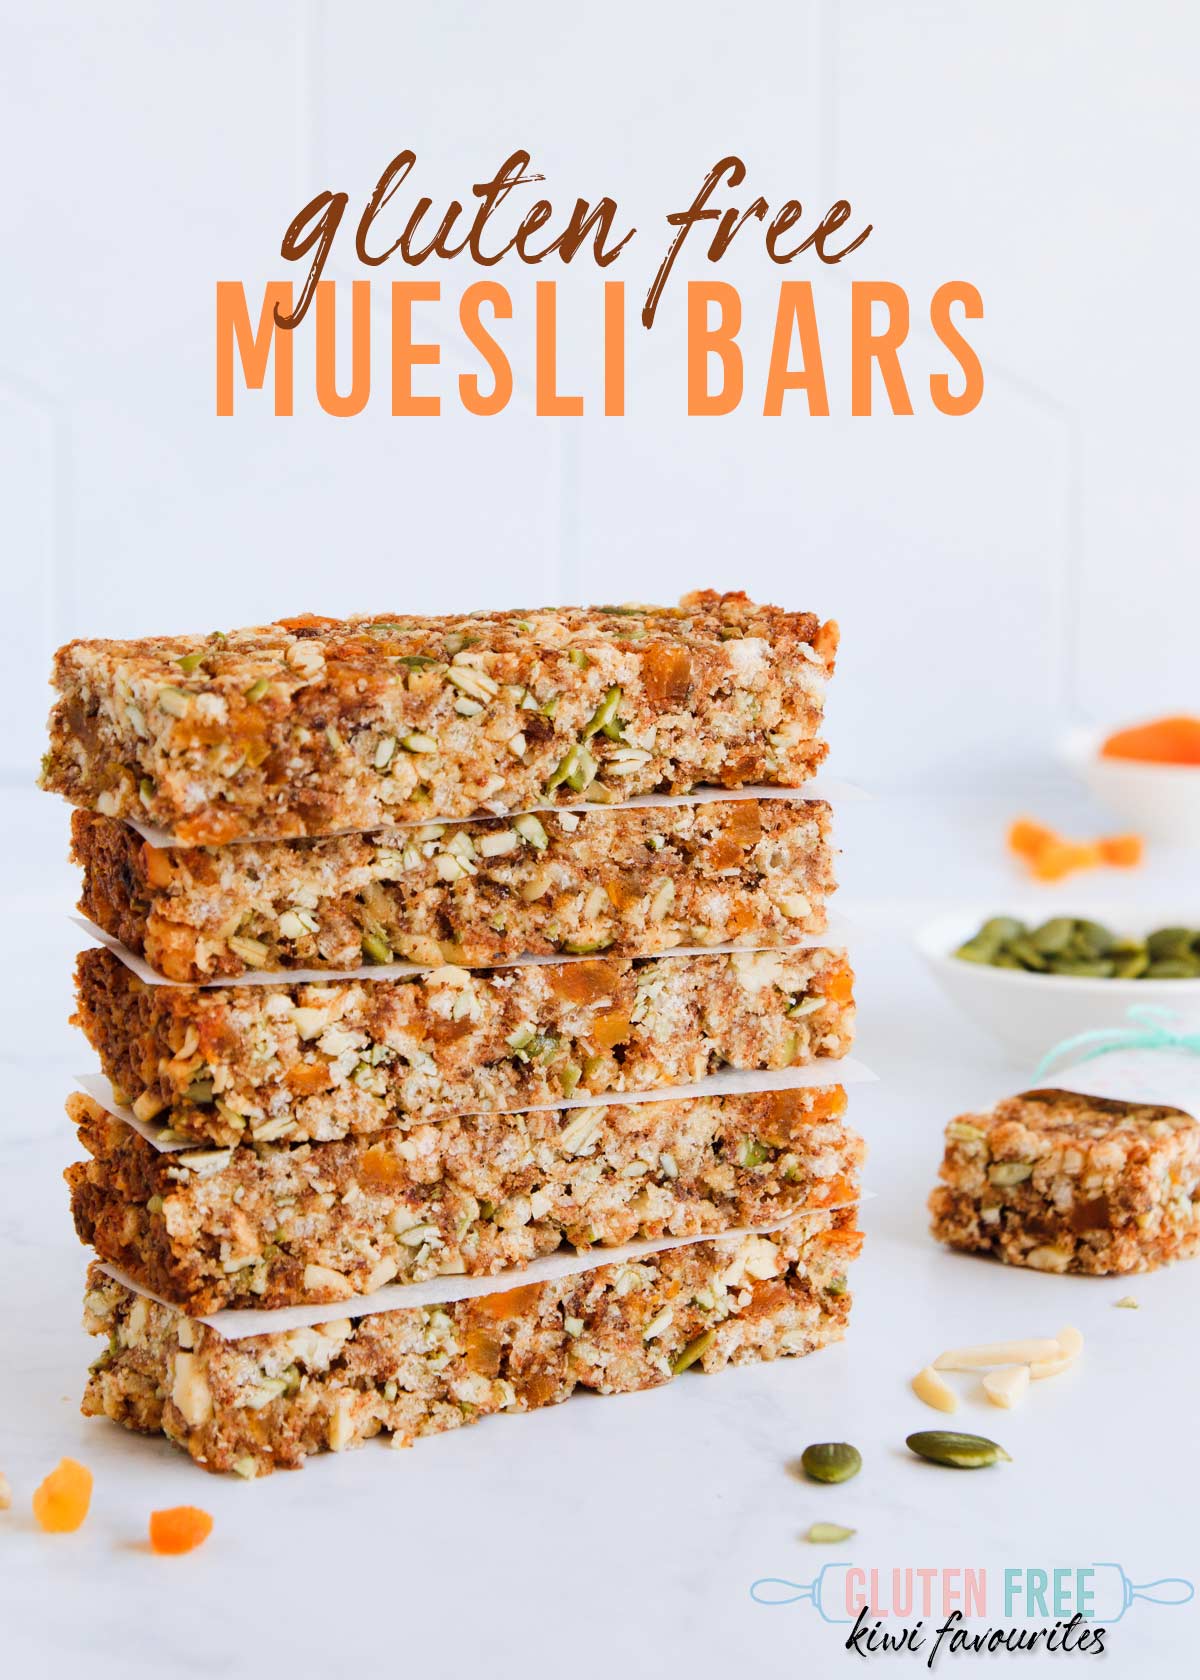 Five stacked muesli bars on a grey background, with scattered almonds and pumpkin seeds, text overlay reads "gluten free muesli bars".